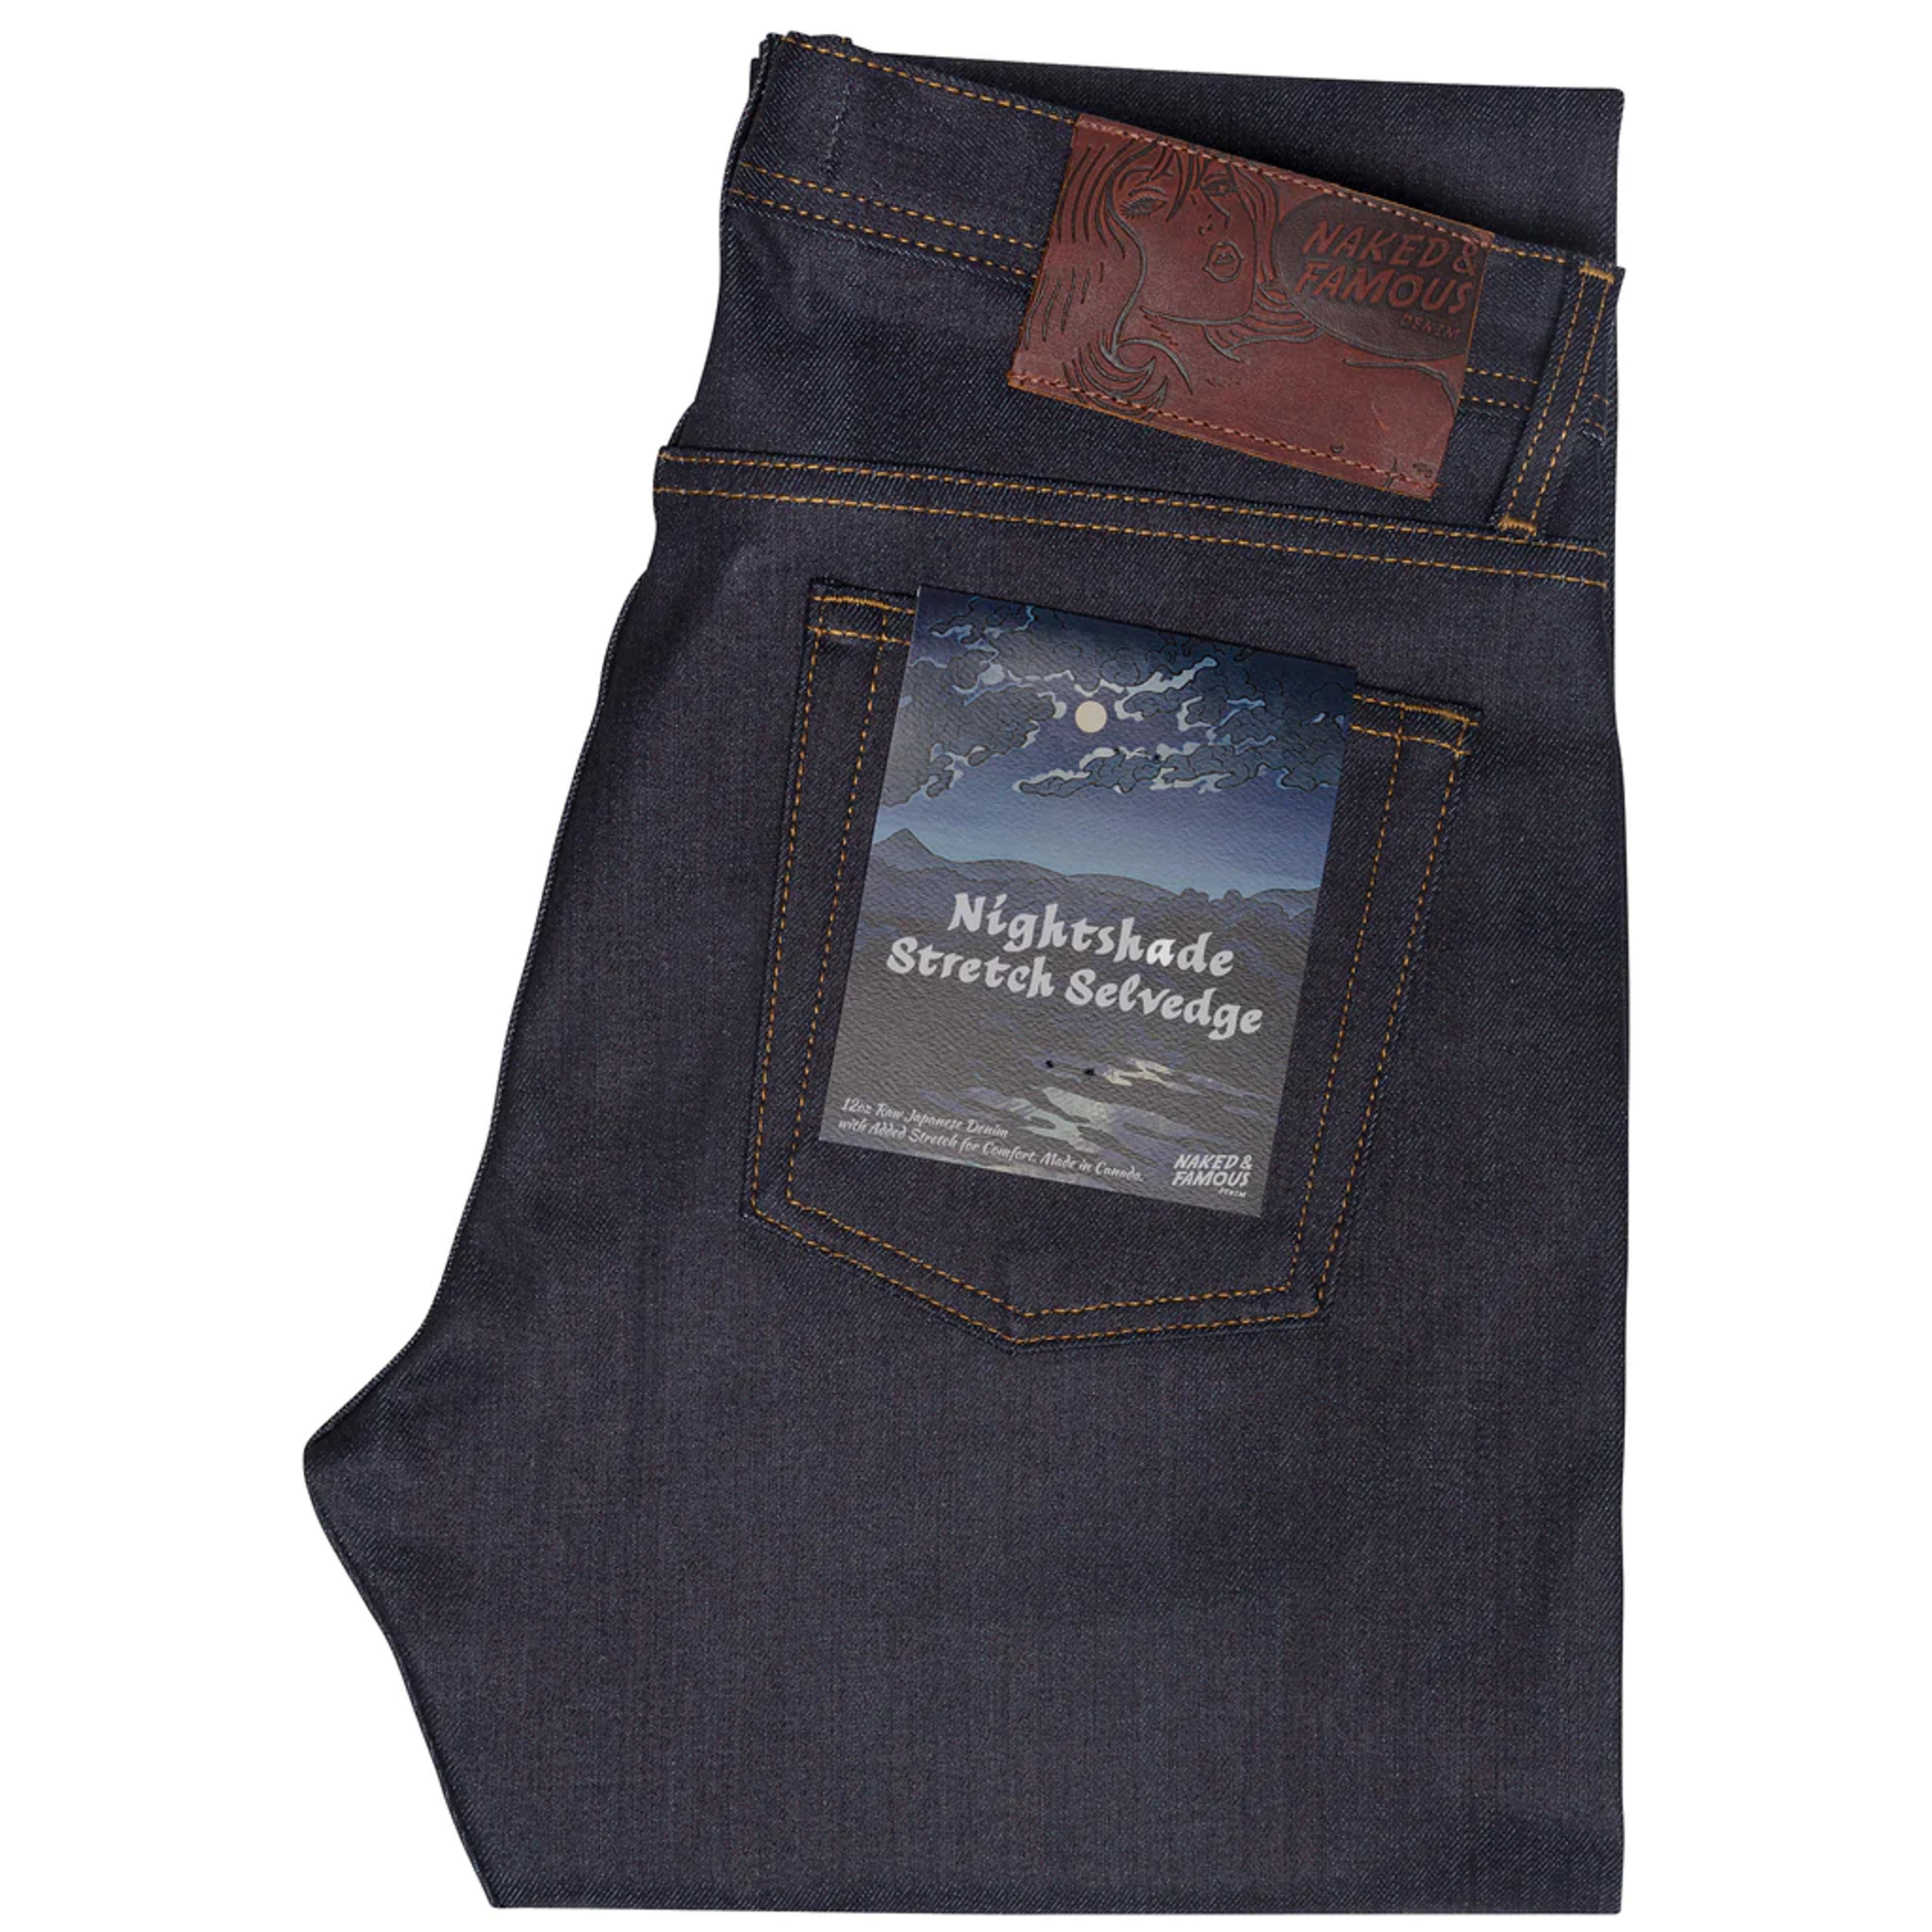 tateandyoko.com/products/weird-guy-nightshade-stretch-selvedge?variant=13617020698698